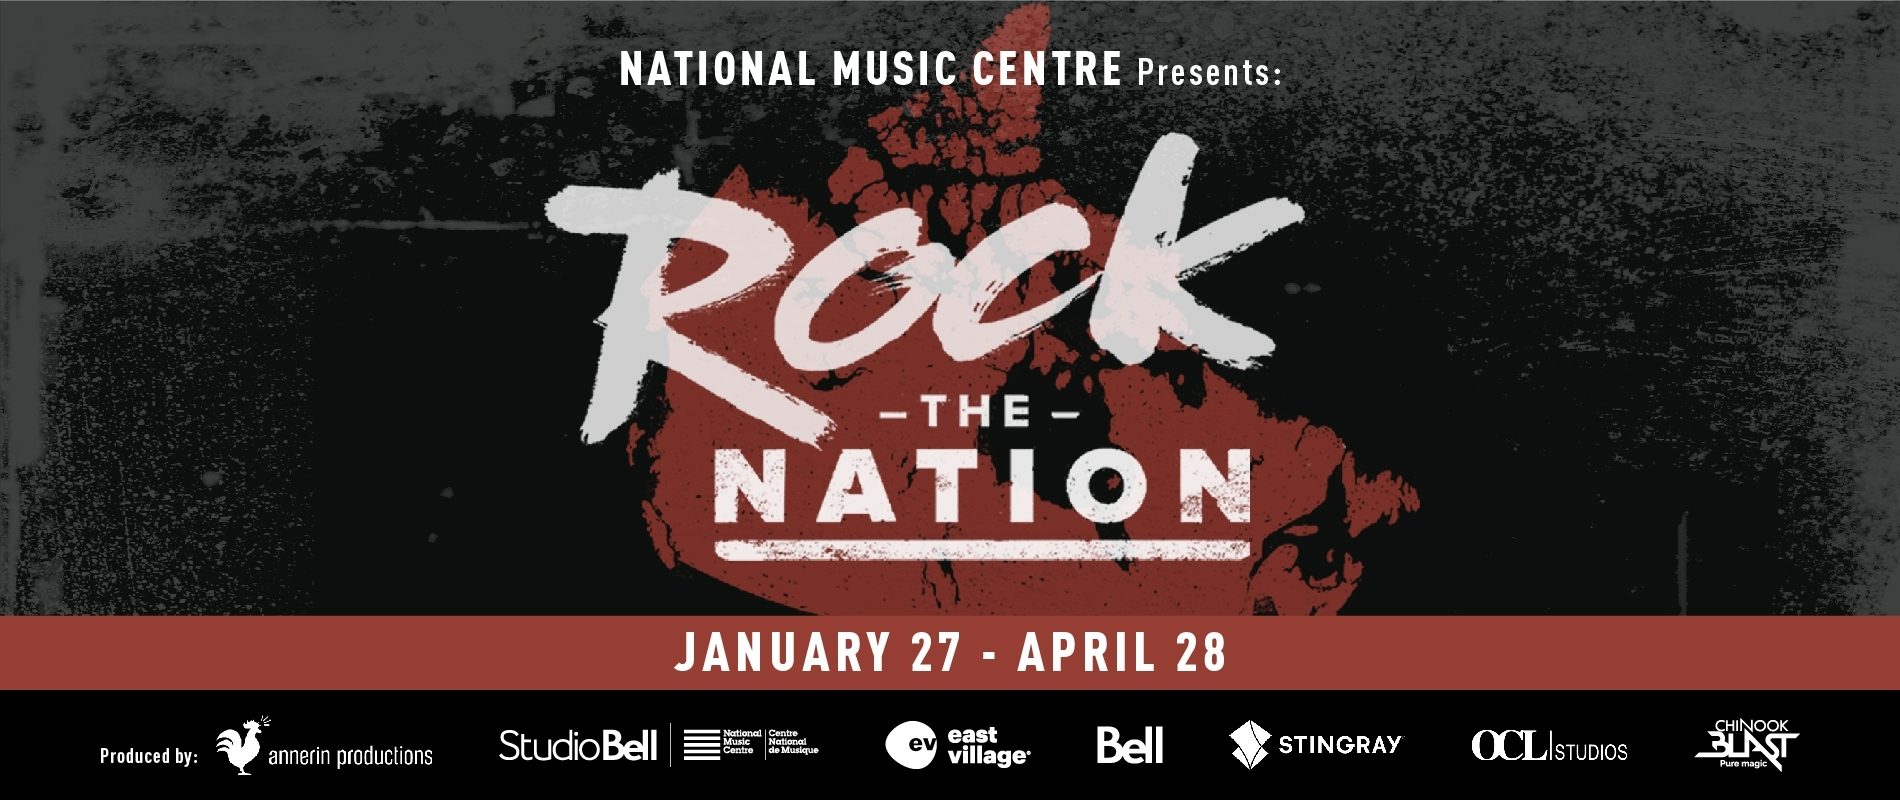 National Music Centre and Annerin Productions Bring Rock the Nation Back to Studio Bell, From January 27-April 28